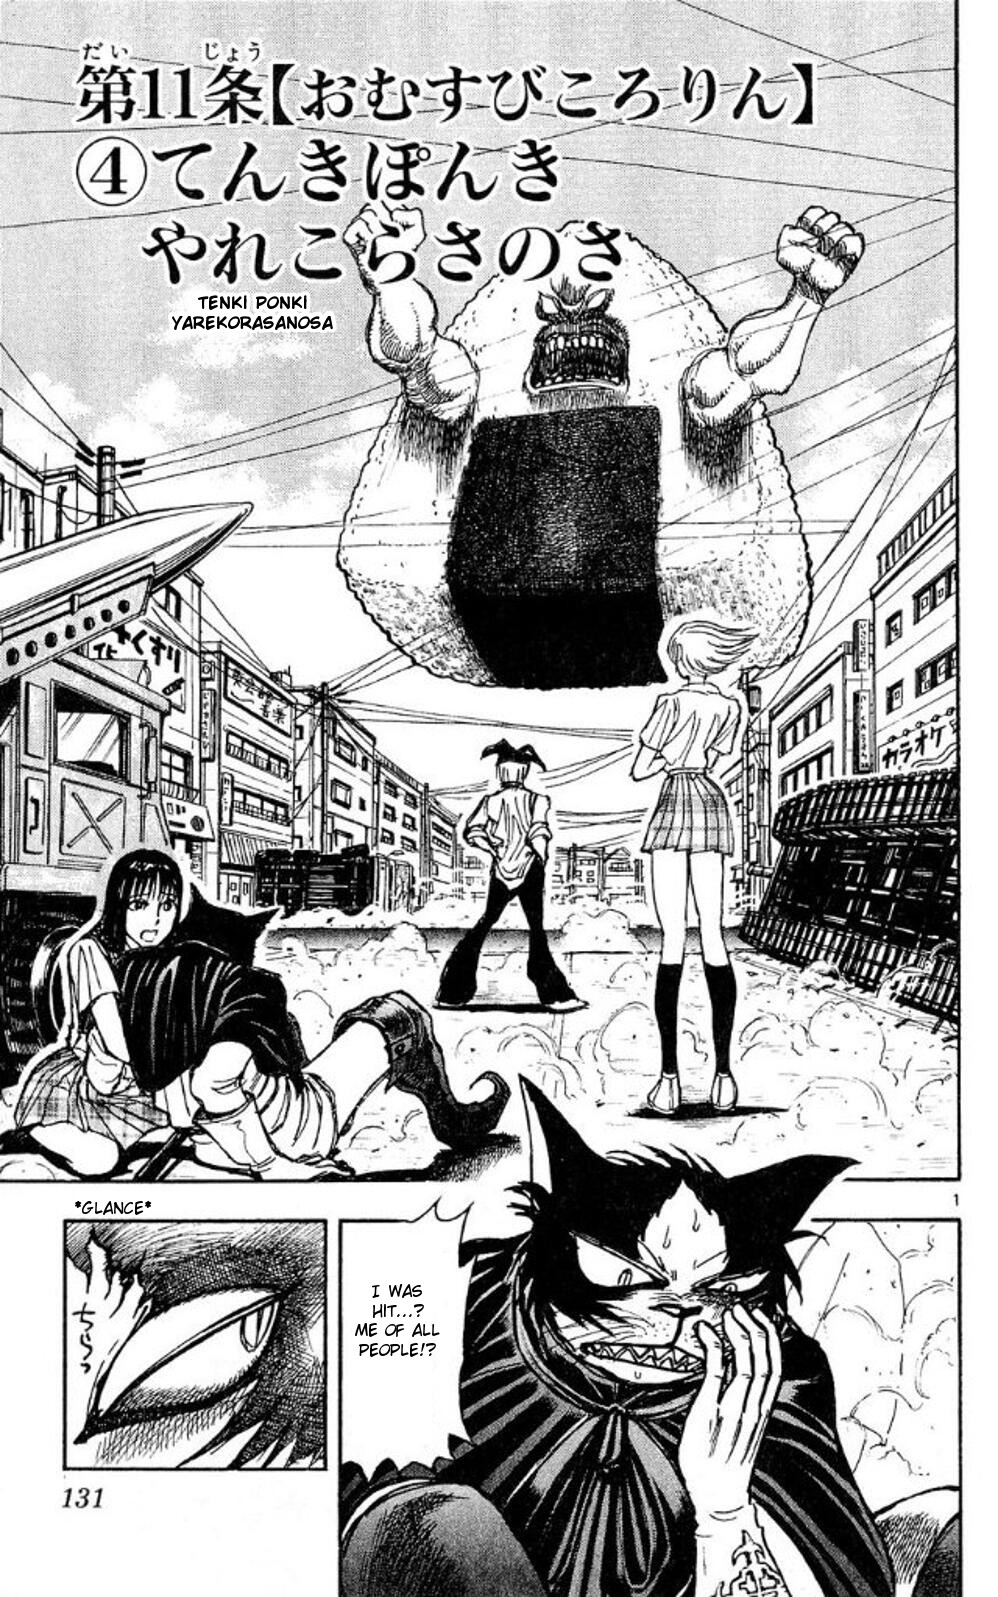 Moonlight Act Vol. 5 Ch. 43 11th Article The Rolling Riceball Part 4